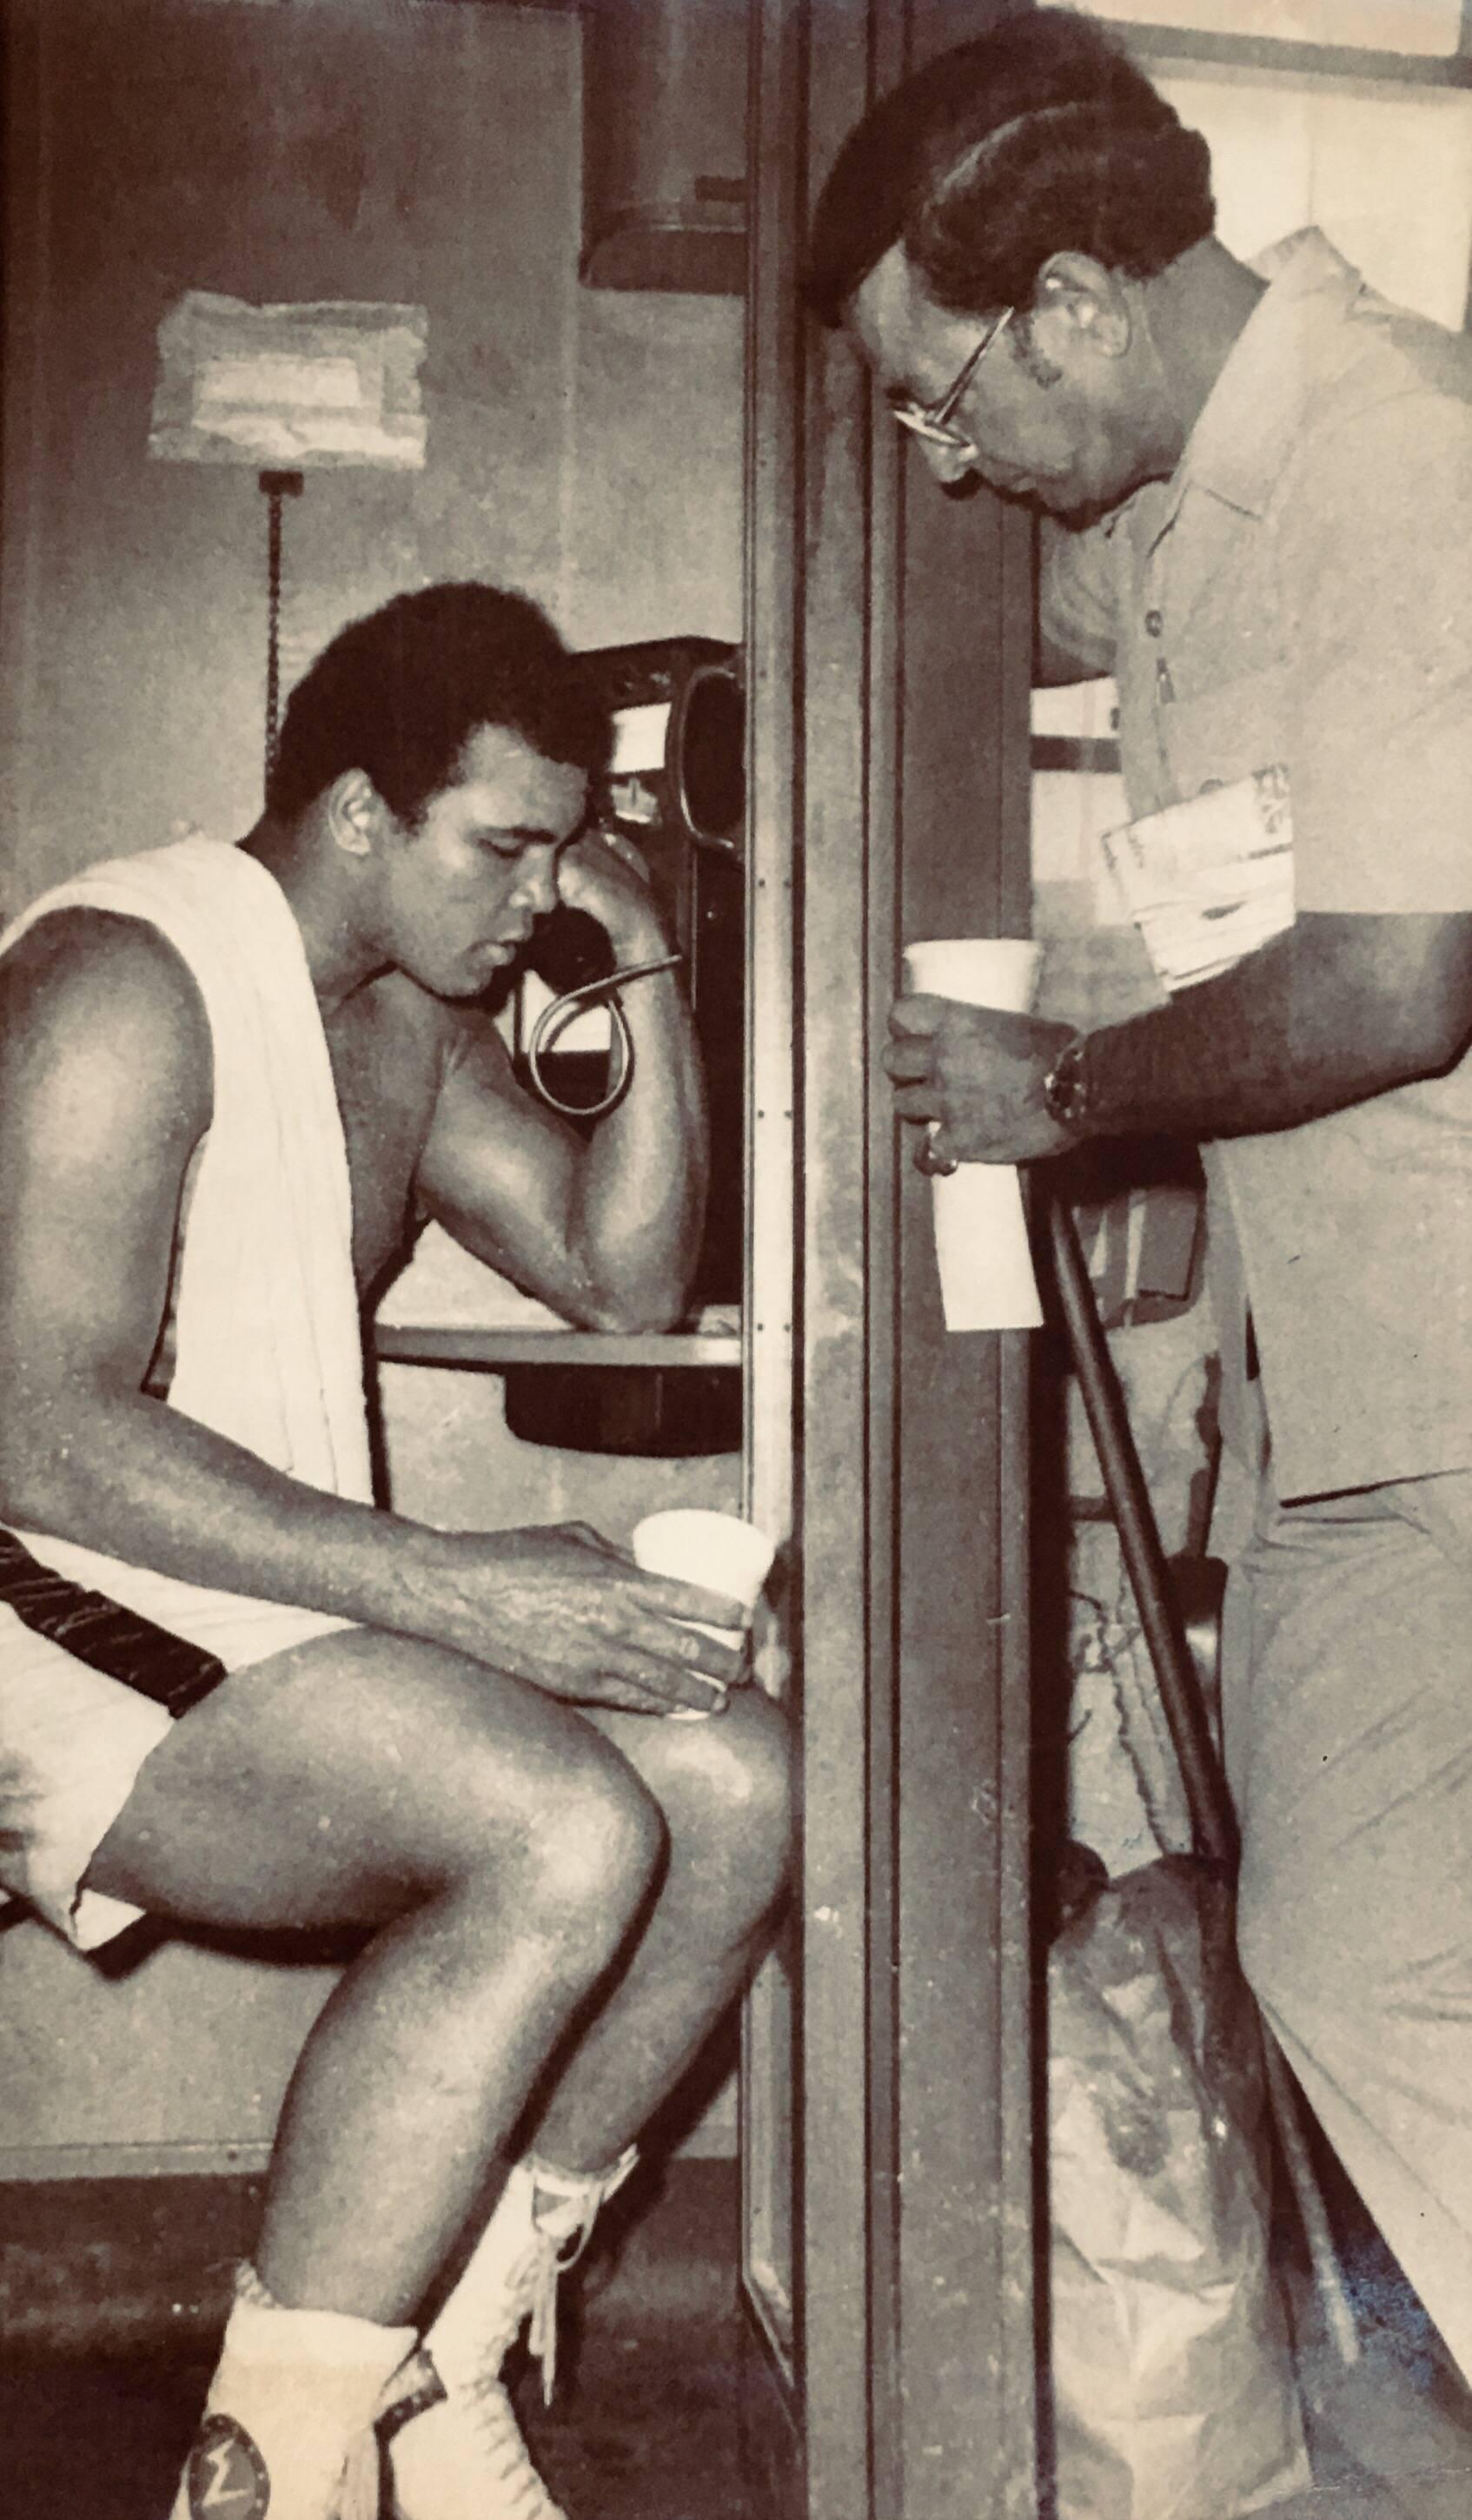 Muhammad Ali, vintage original press photo circa late 1960s-early 1970s. Photographed in Miami alongside noted Ali trainer Angelo Dundee and used as a press piece to announce Ali's forthcoming fight with Joe Frazier.

Measures approximately 6.5 x